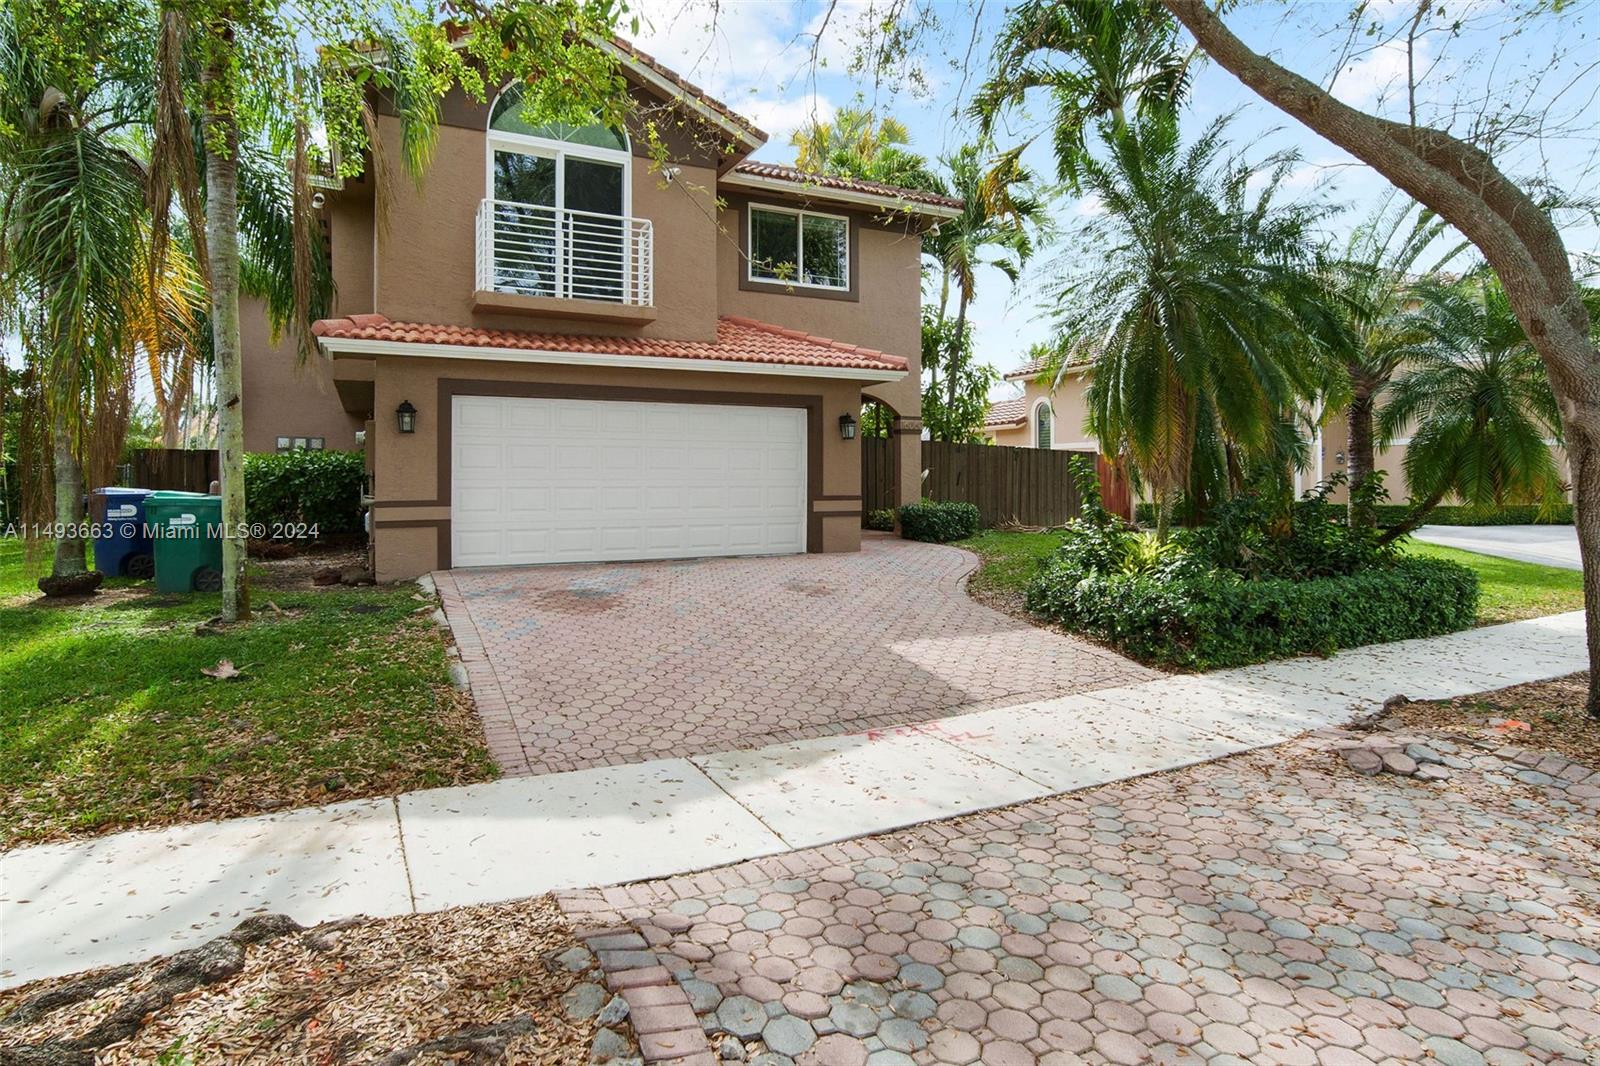 Quiet neighborhood east of US I.  NEST WIFI.  Ring Doorbell, Outside Camera around the house.  Alarm System. 
Waterfall Pool, Hurricane impact doors and windows, recently remodeled.  Canal access and beautiful view.  Large jacuzzi in master bathroom with canal view.